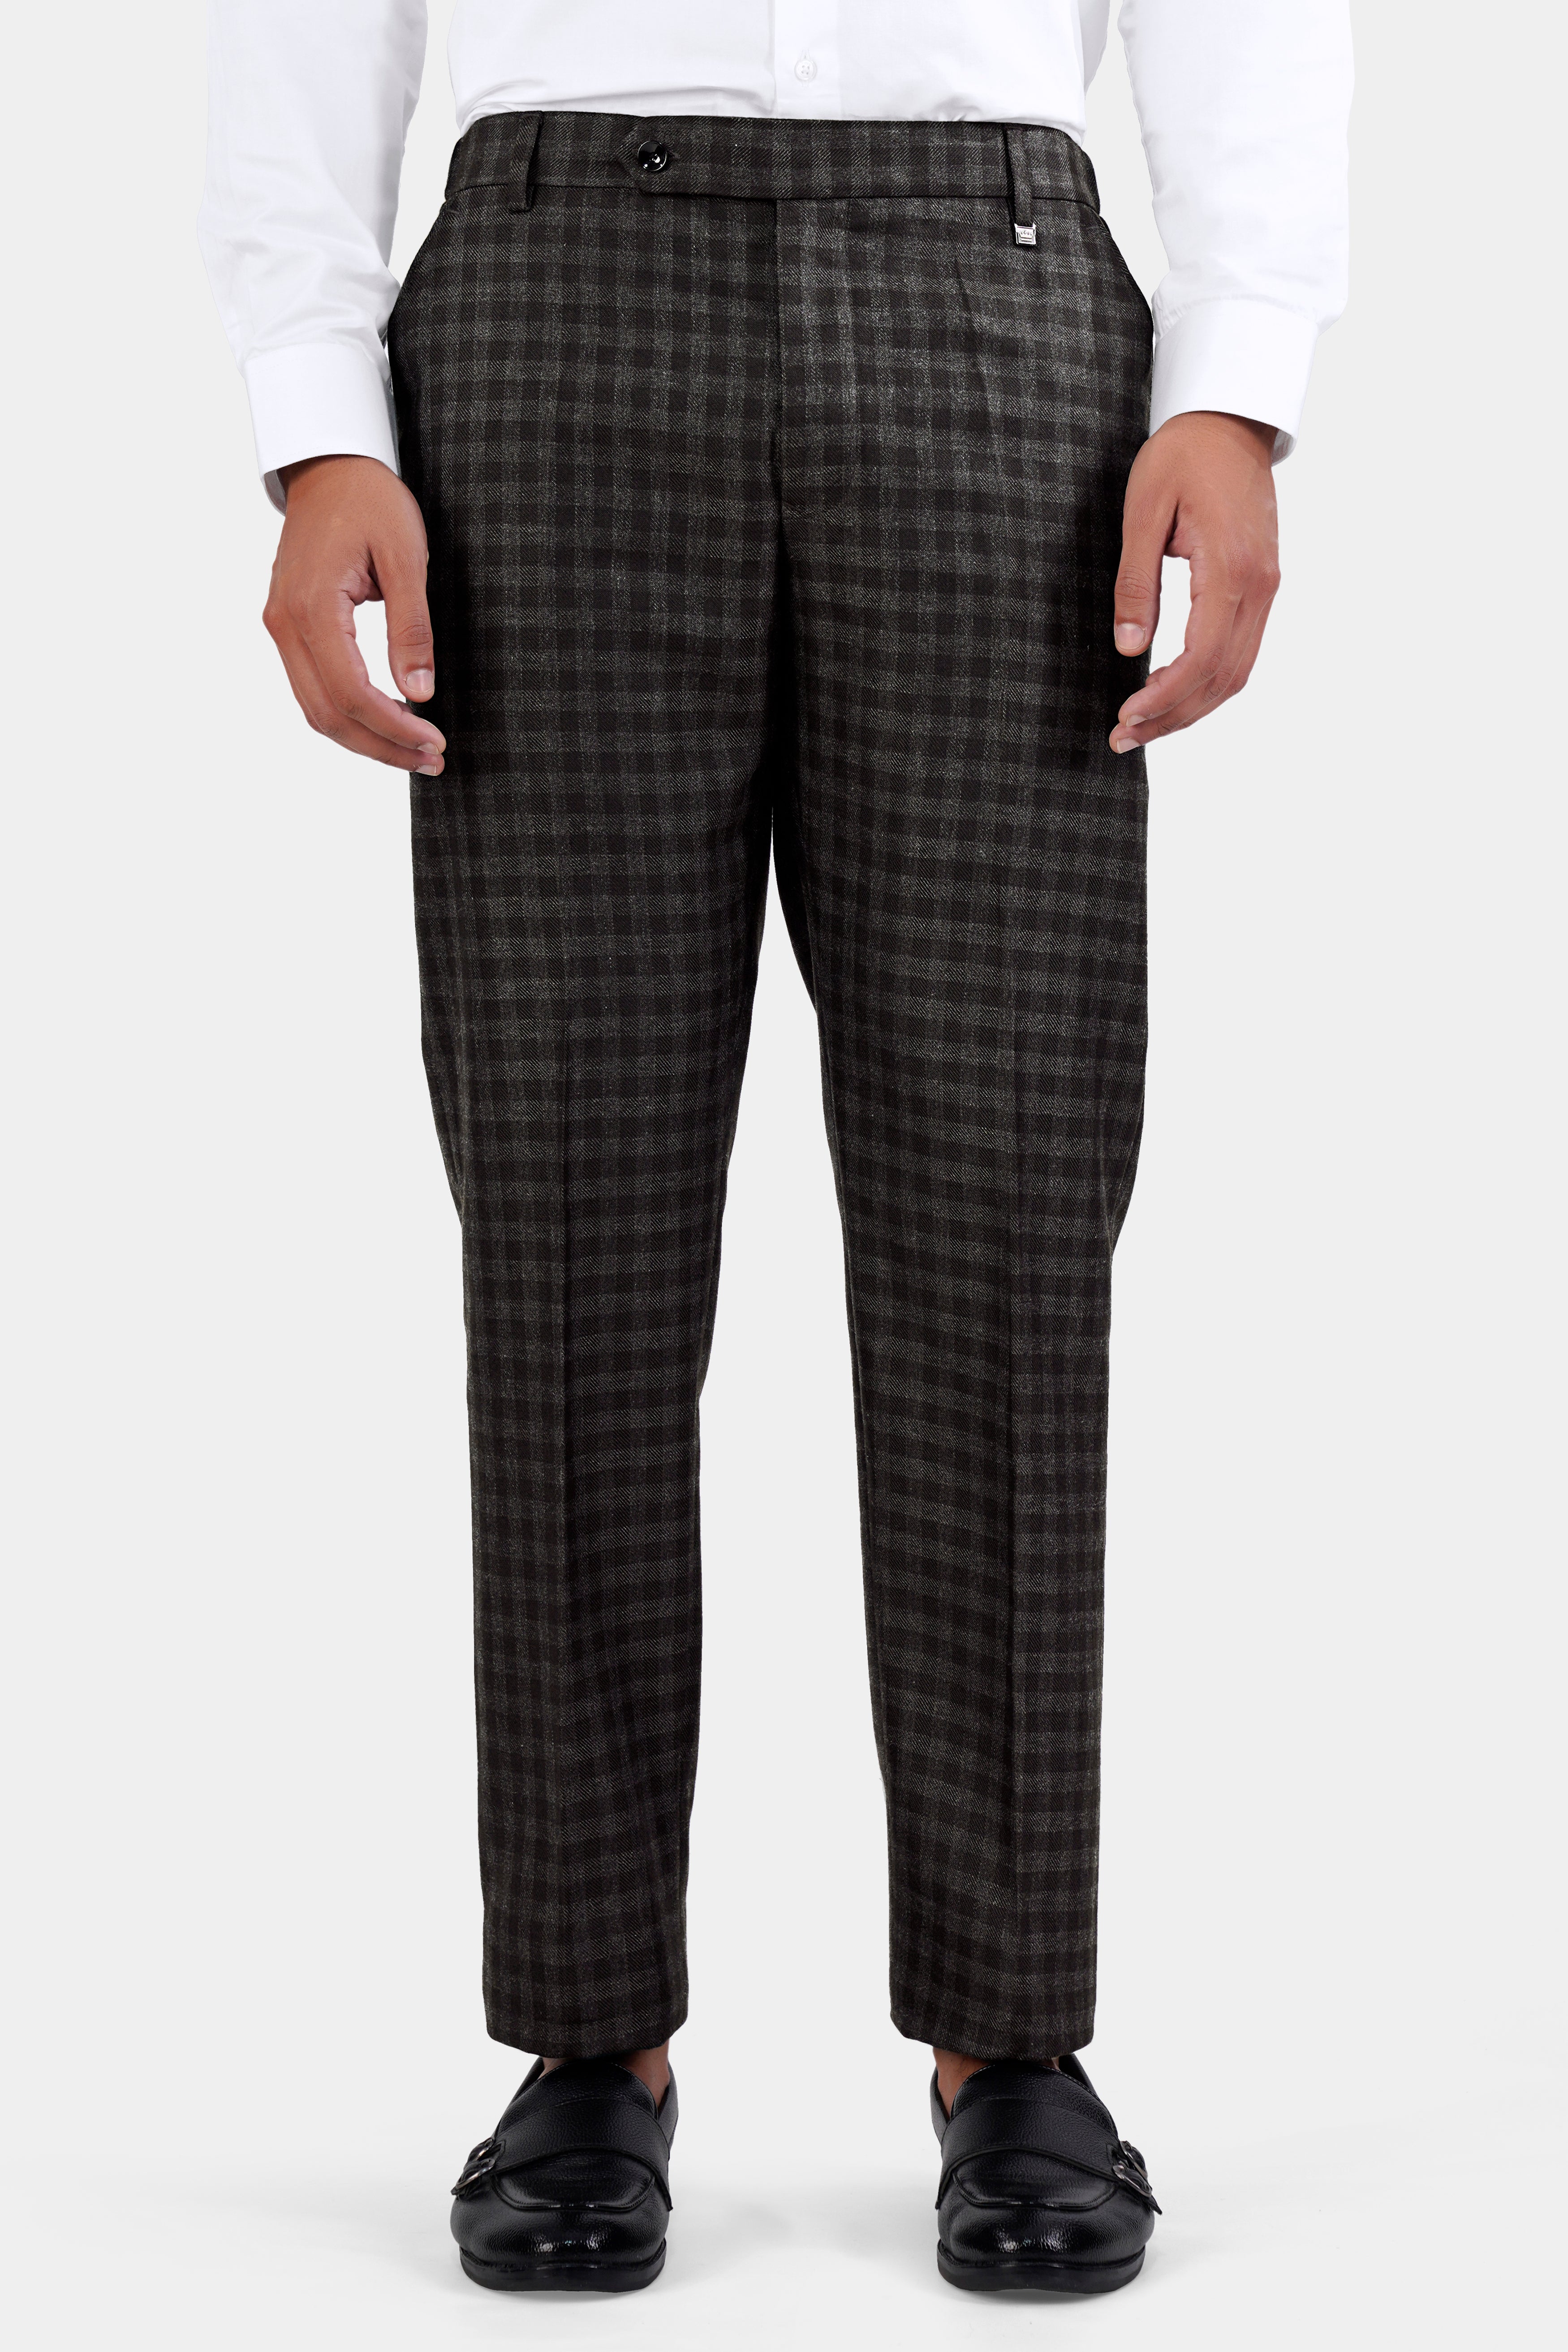 Jade Black and Storm Brown Checkered Wool Rich Pant T2898-SW-28, T2898-SW-30, T2898-SW-32, T2898-SW-34, T2898-SW-36, T2898-SW-38, T2898-SW-40, T2898-SW-42, T2898-SW-44